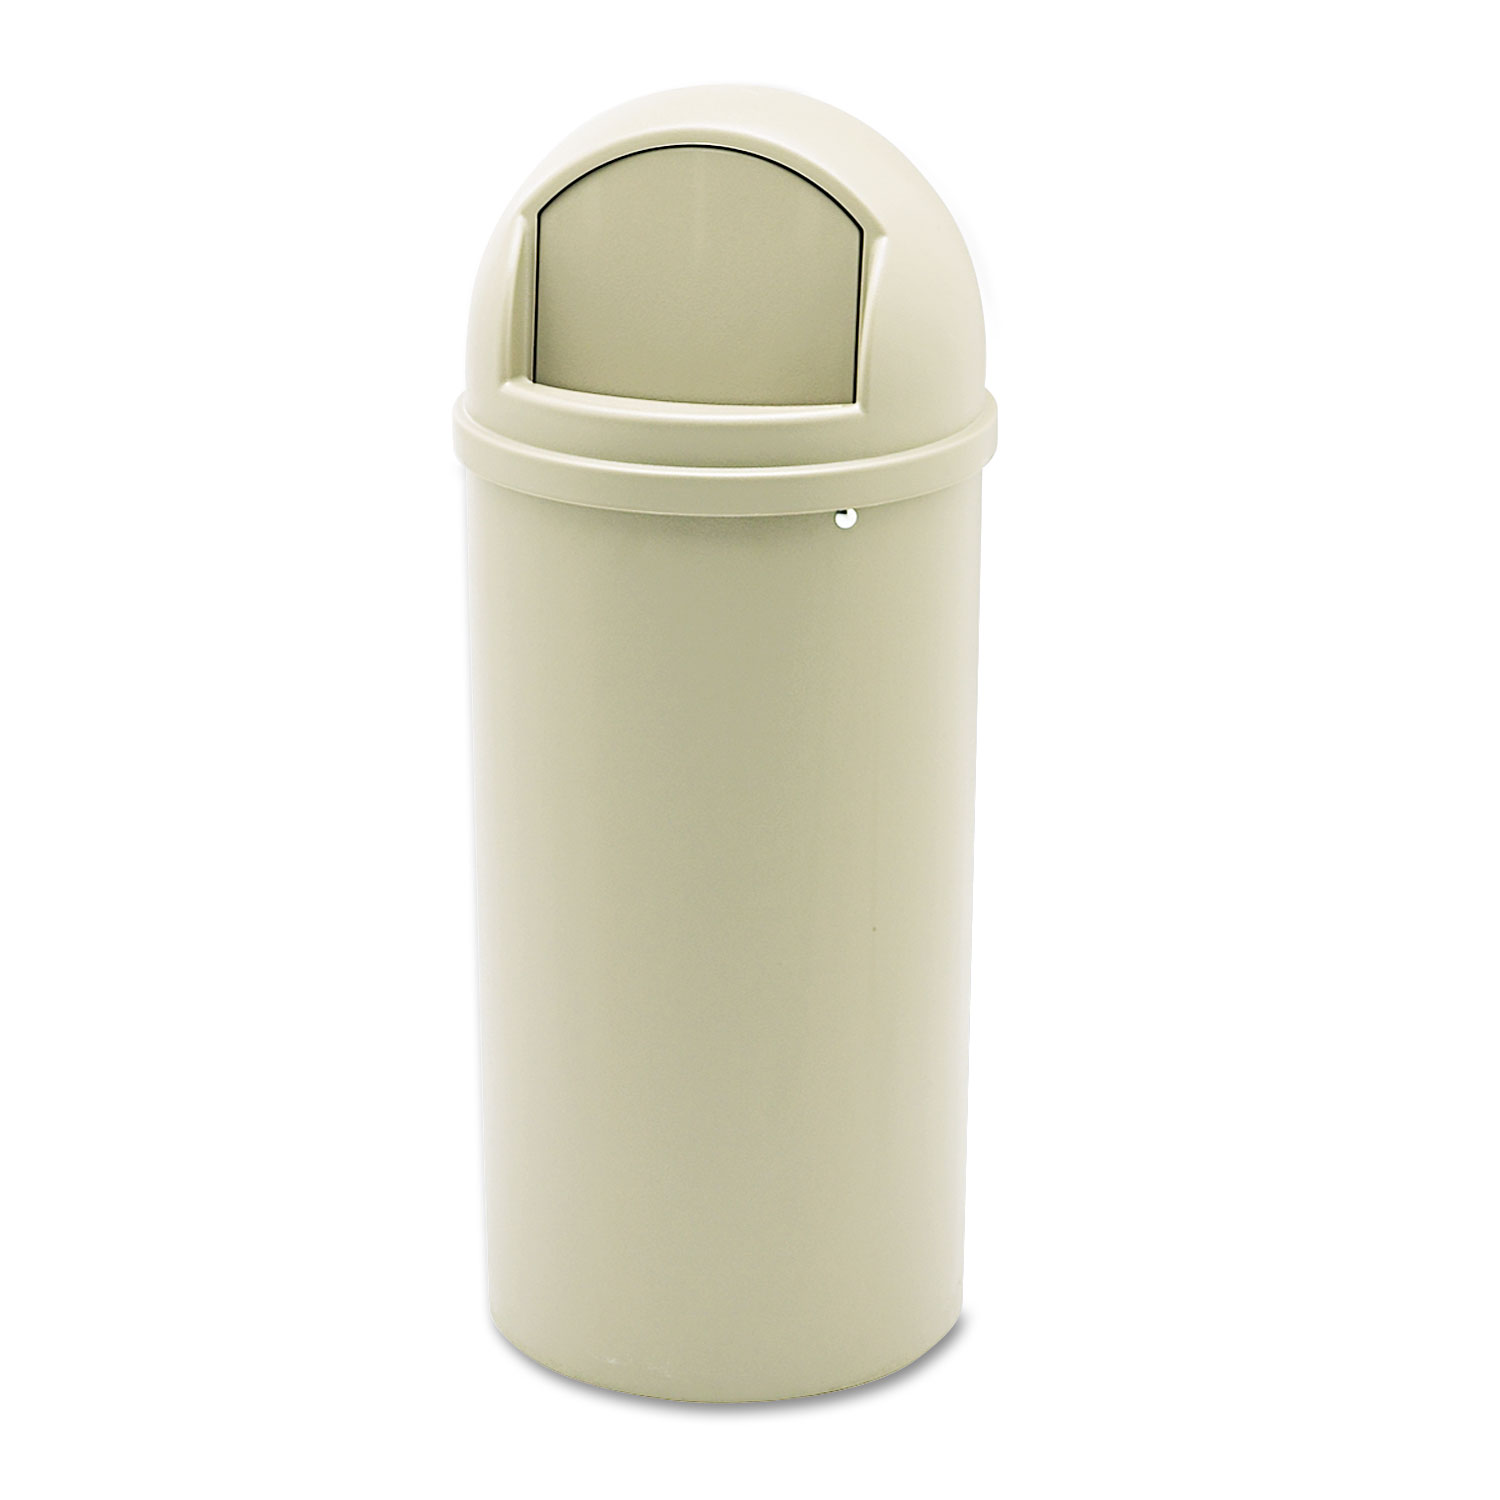 Marshal Classic Container, Round, Polyethylene, 15gal, Beige